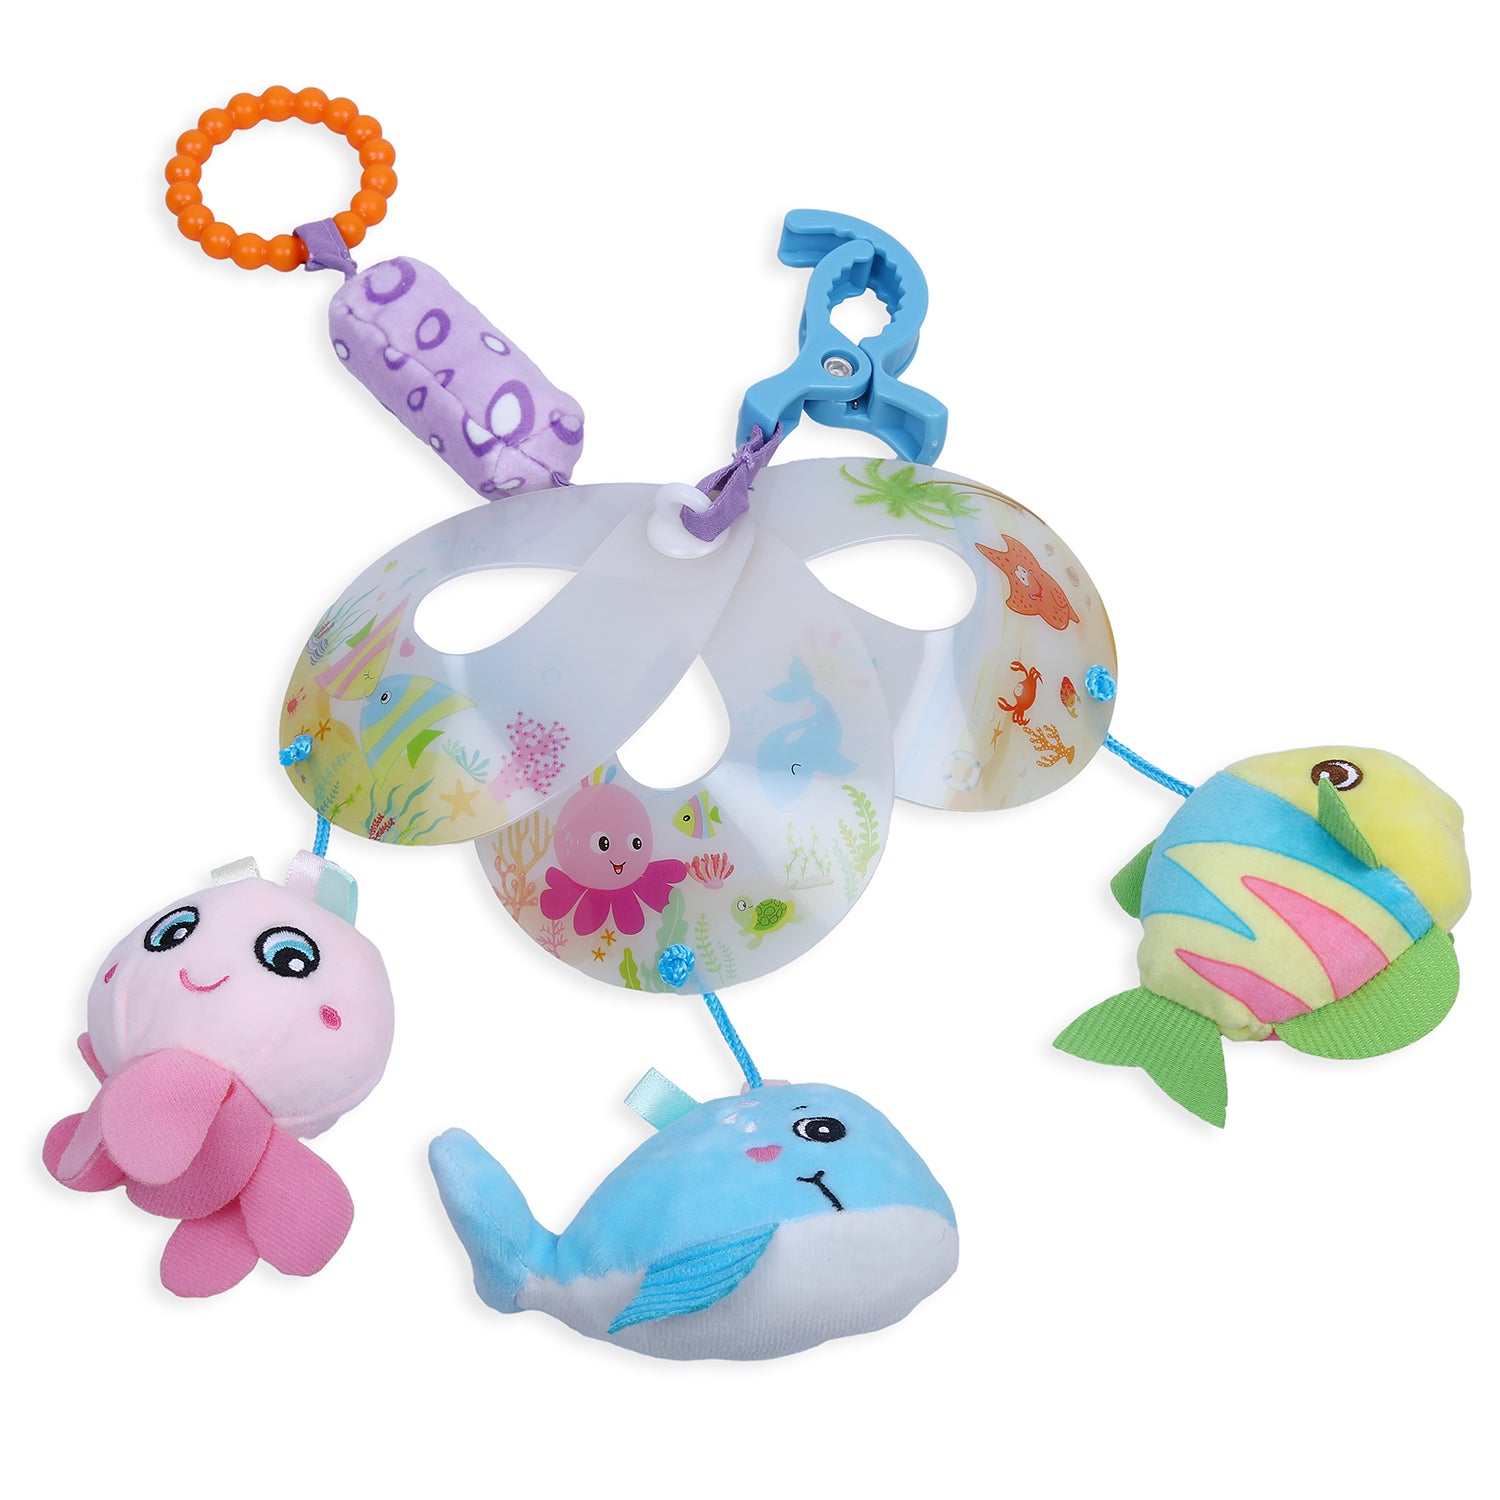 Ocean Friends Clip-On Foldable Rotating Wind Chime Cot Mobile With Hanging Rattle Toys - Multicolour - Baby Moo